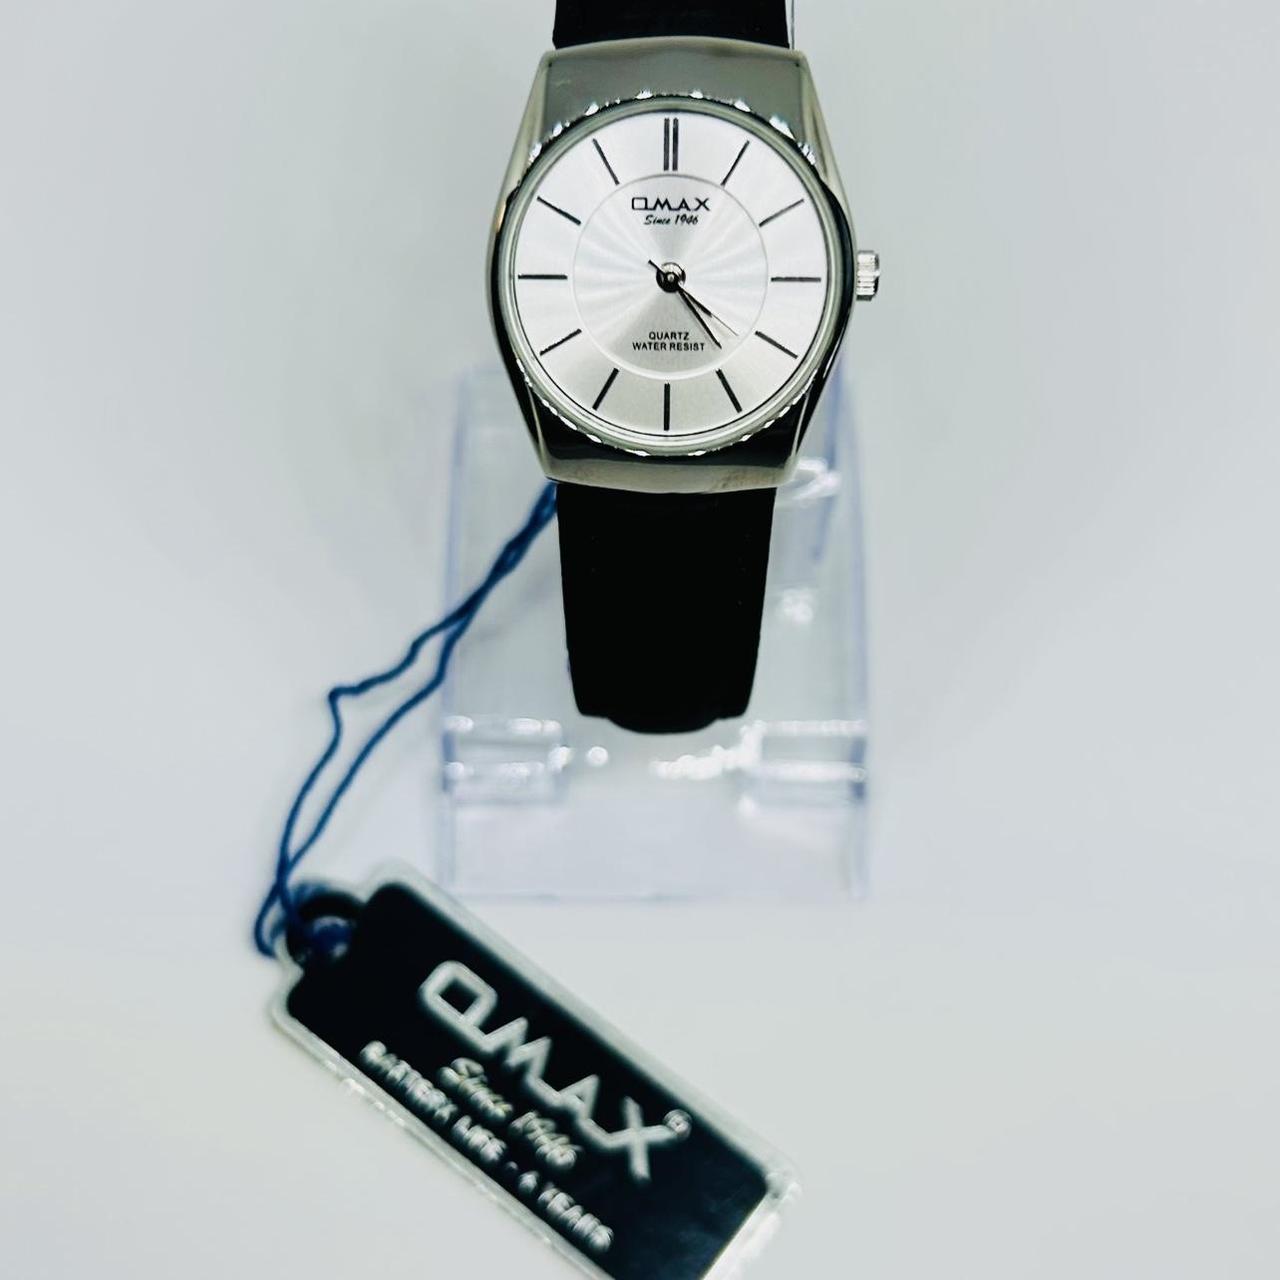 Omax Automatic Swiss Made Men watch for Parts/repair/watchmaker. | eBay